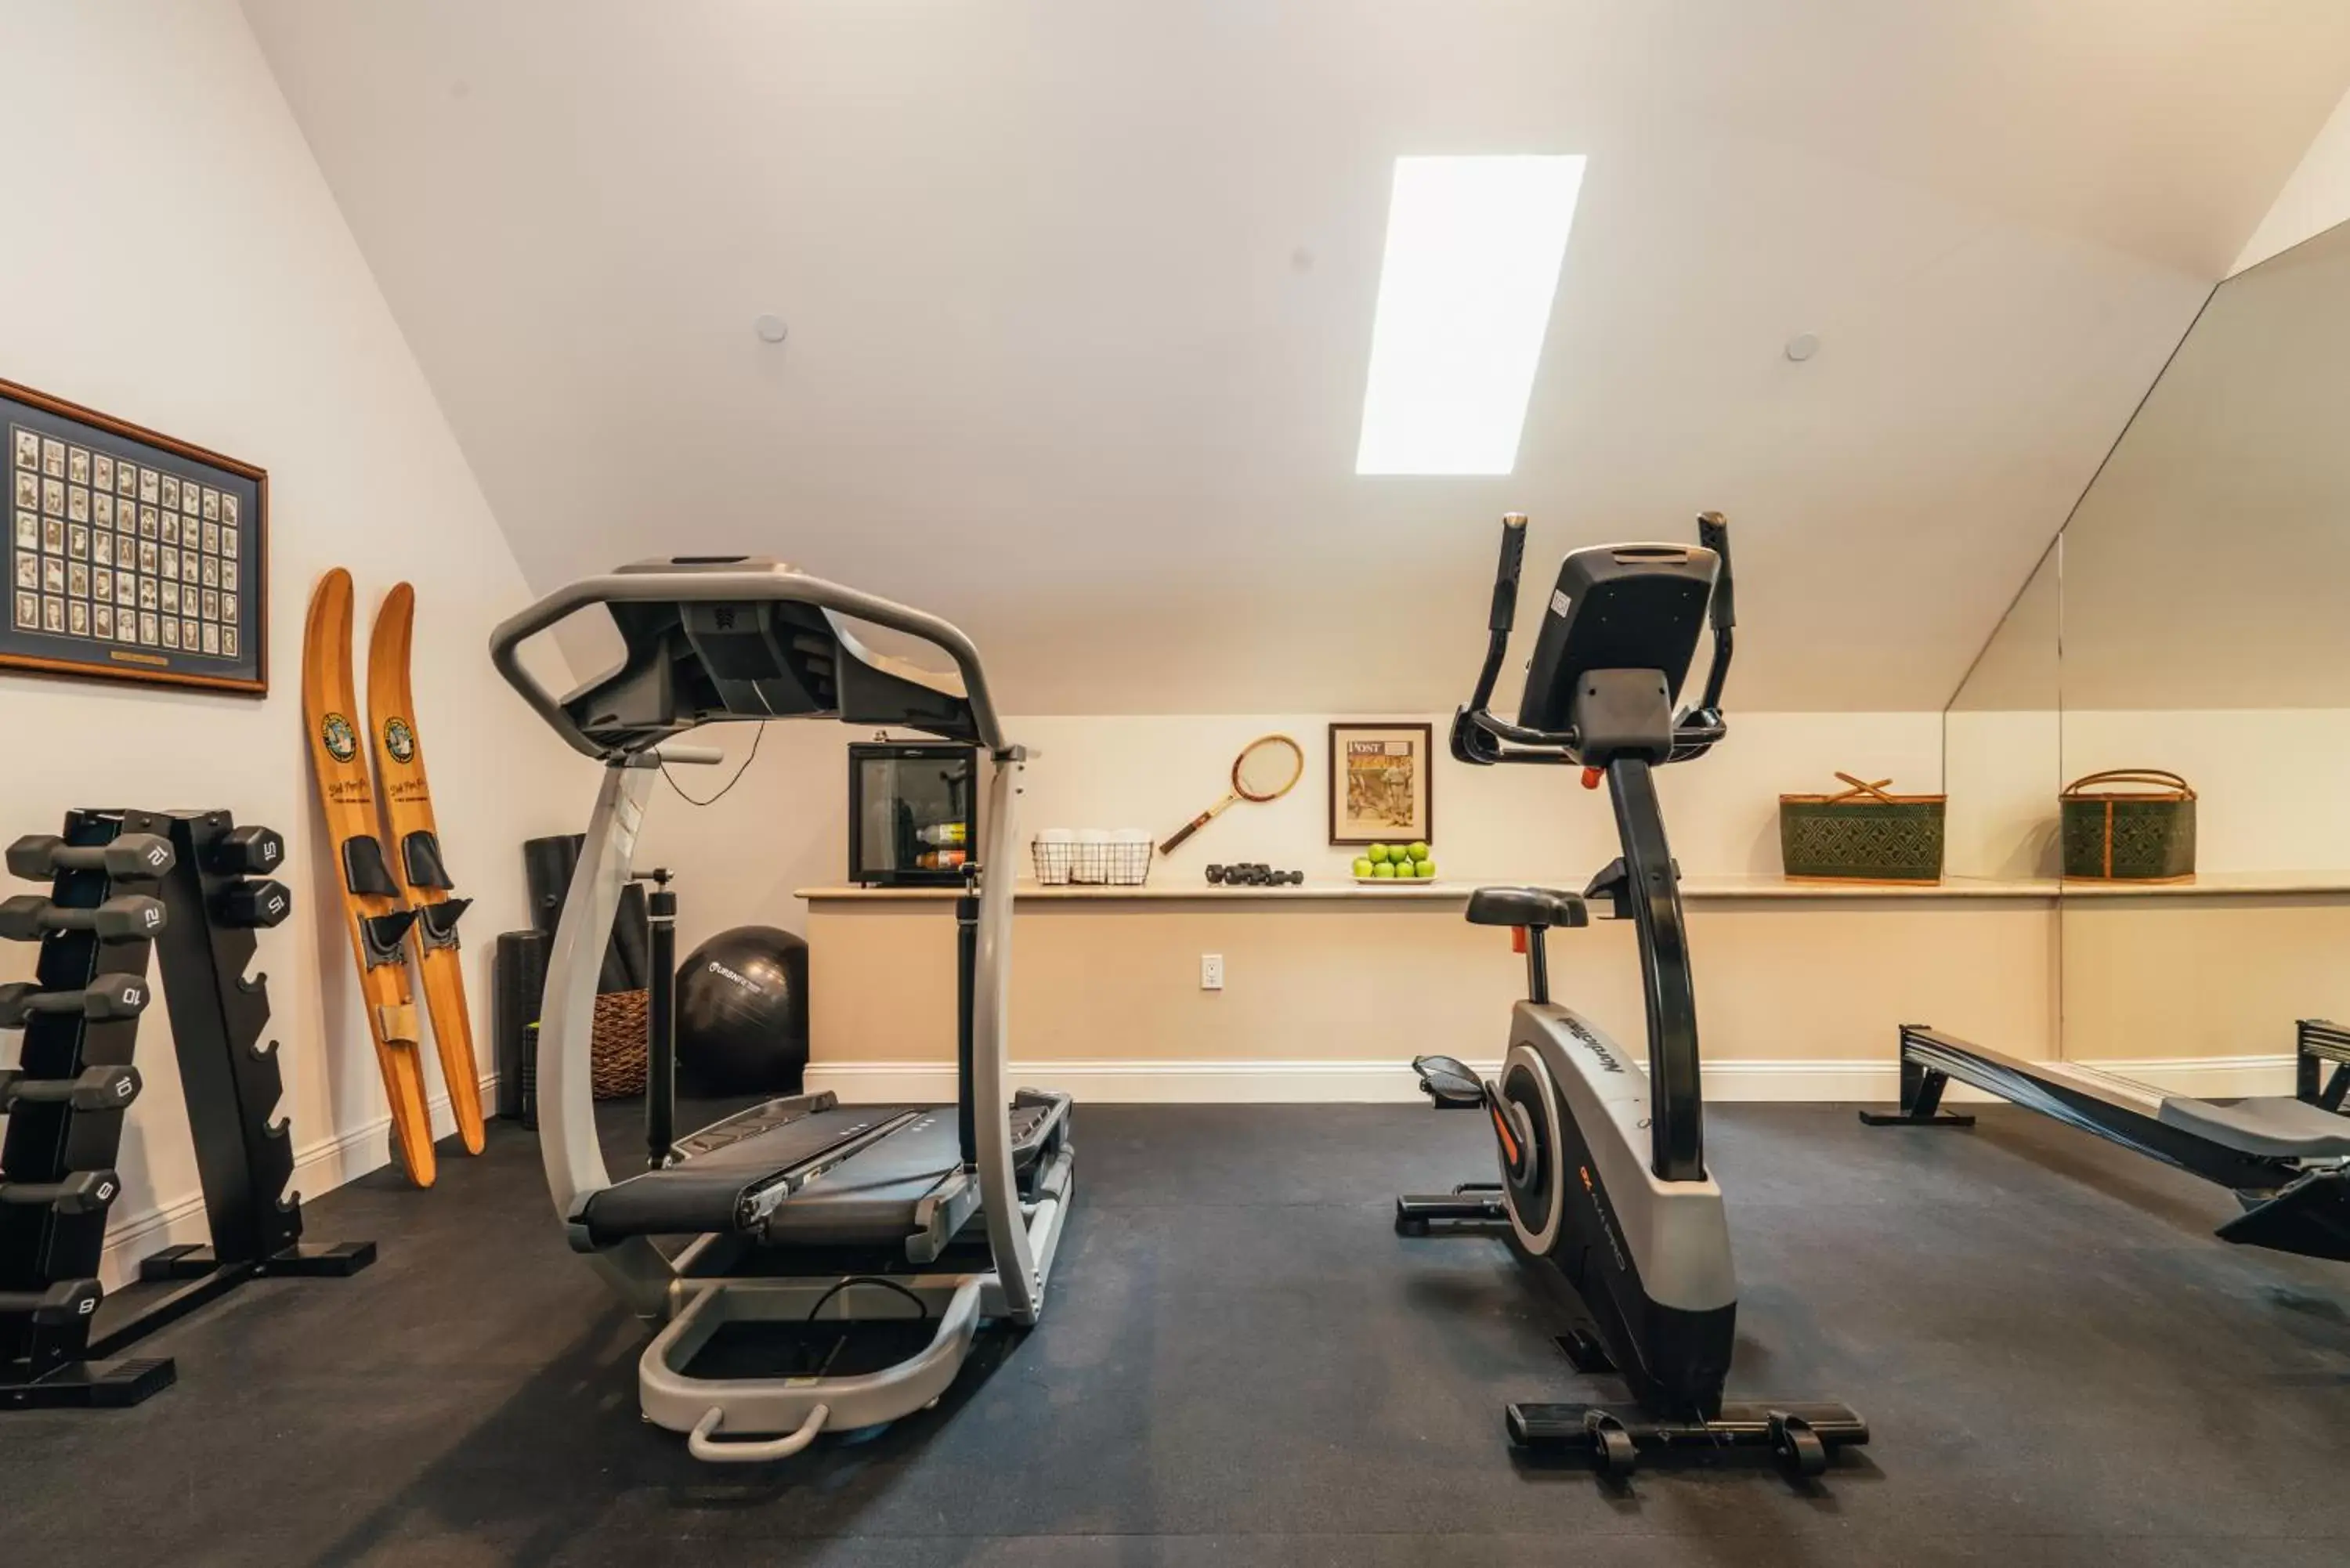 Fitness centre/facilities, Fitness Center/Facilities in Mansion on Sutter